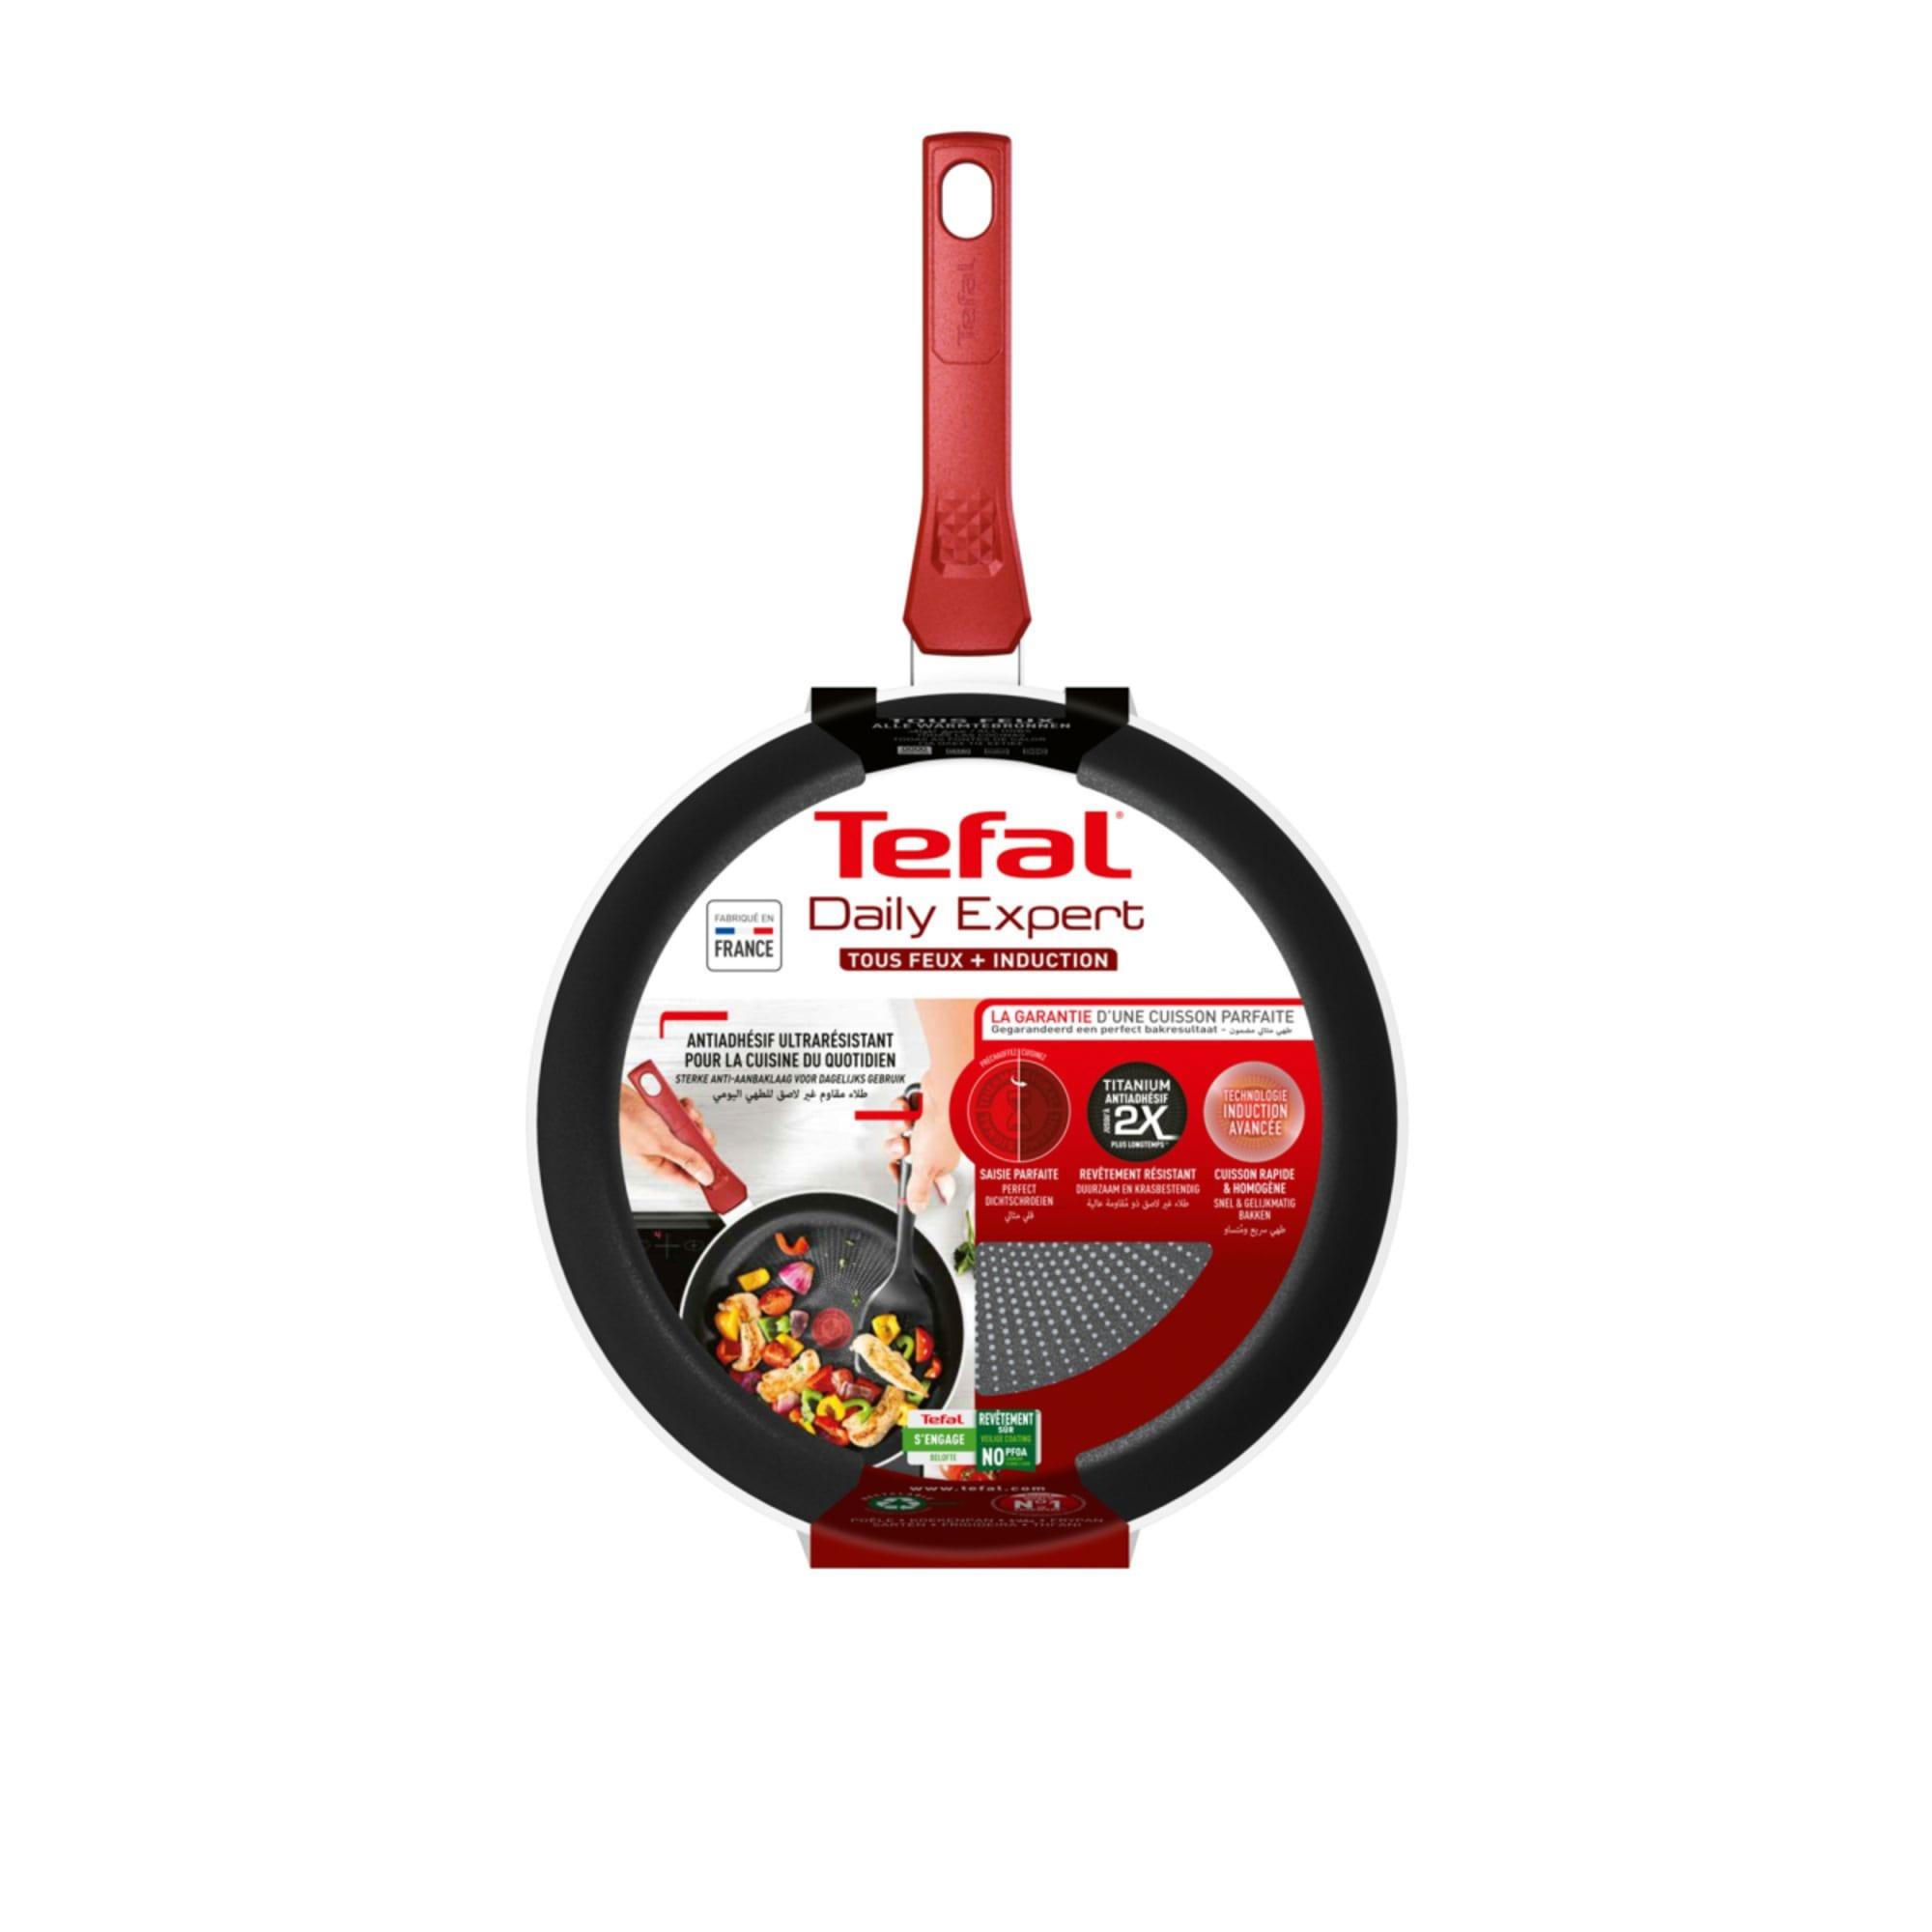 Tefal Daily Expert Frypan 28cm Red Image 4